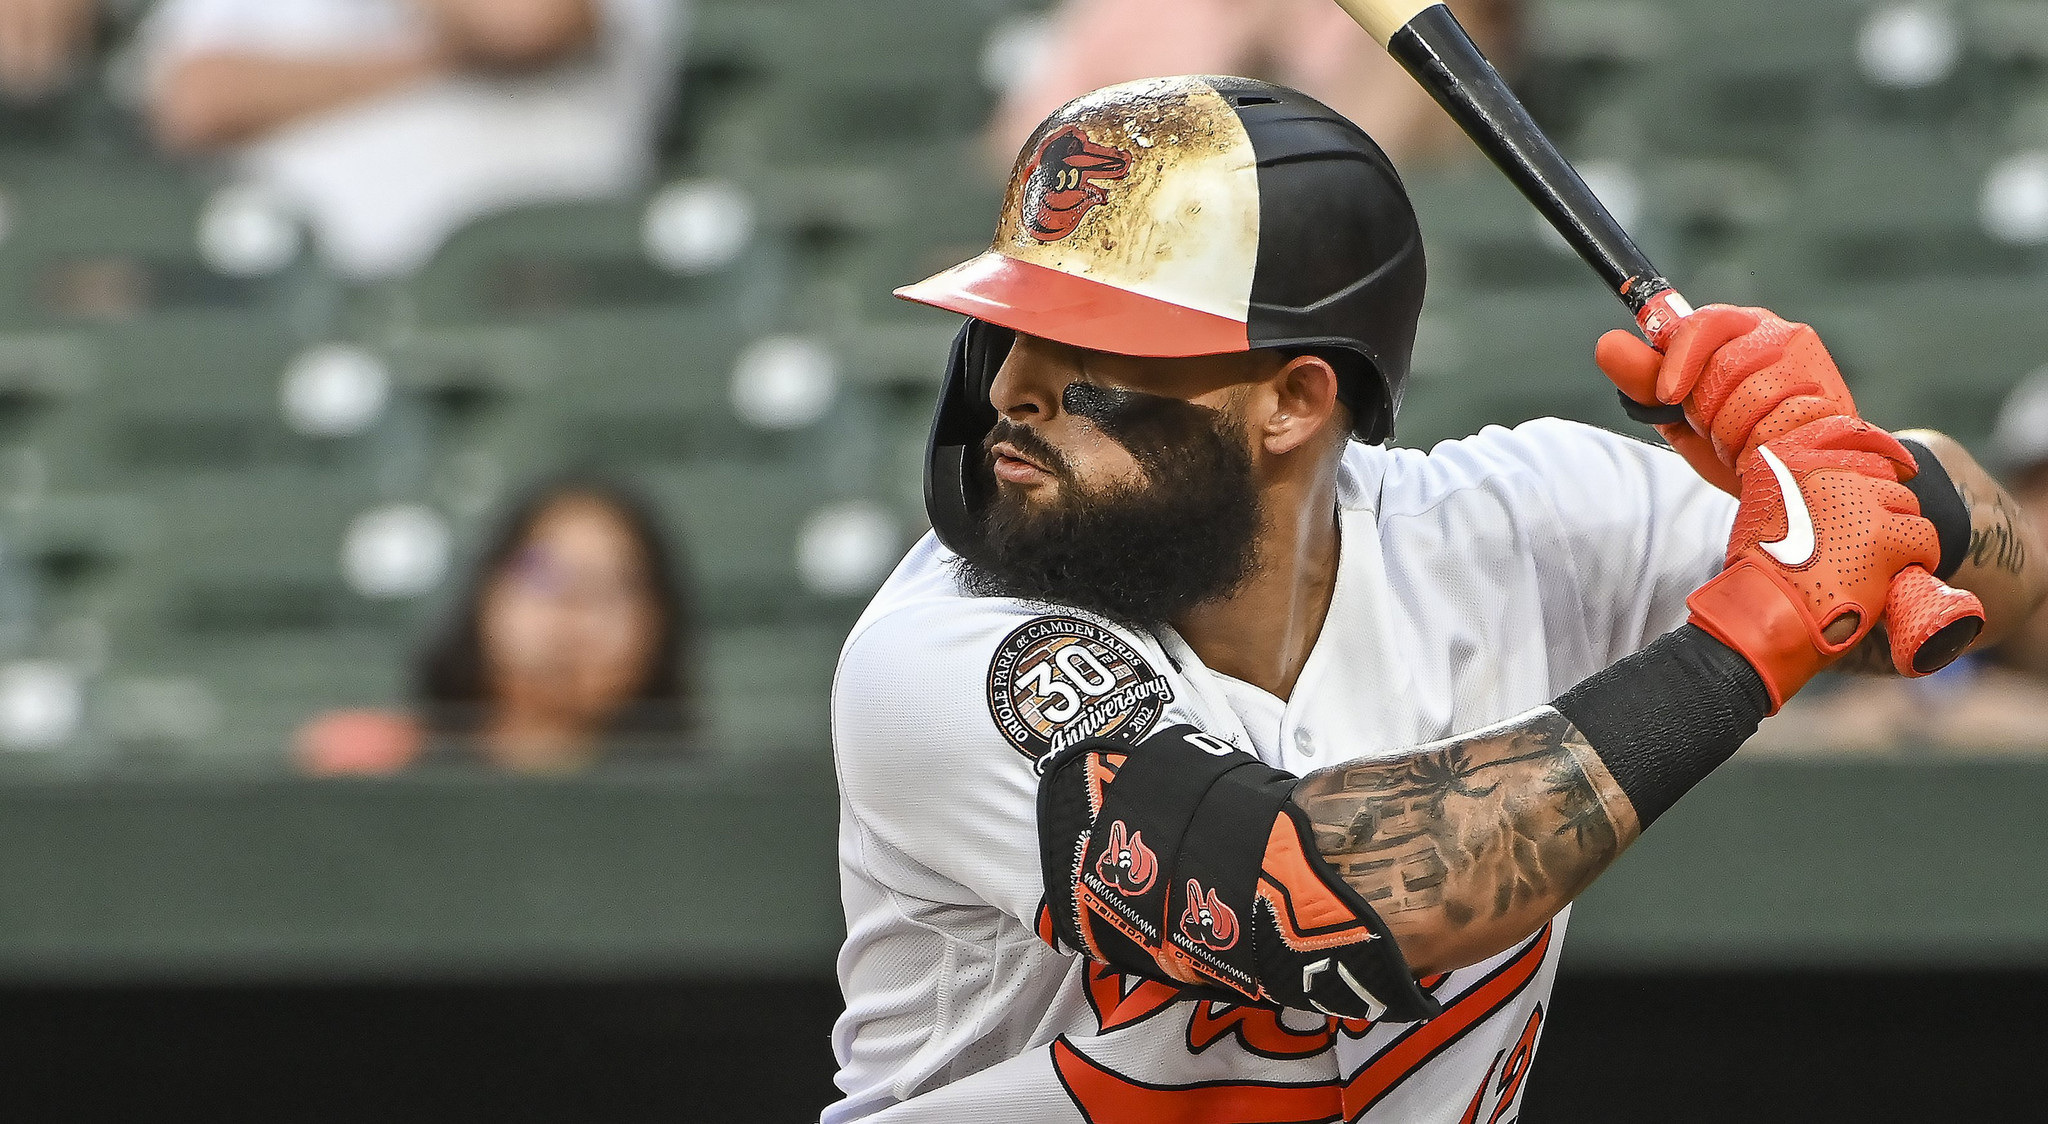 With the aim to 'do damage,' Rougned Odor has turned his Orioles season  around